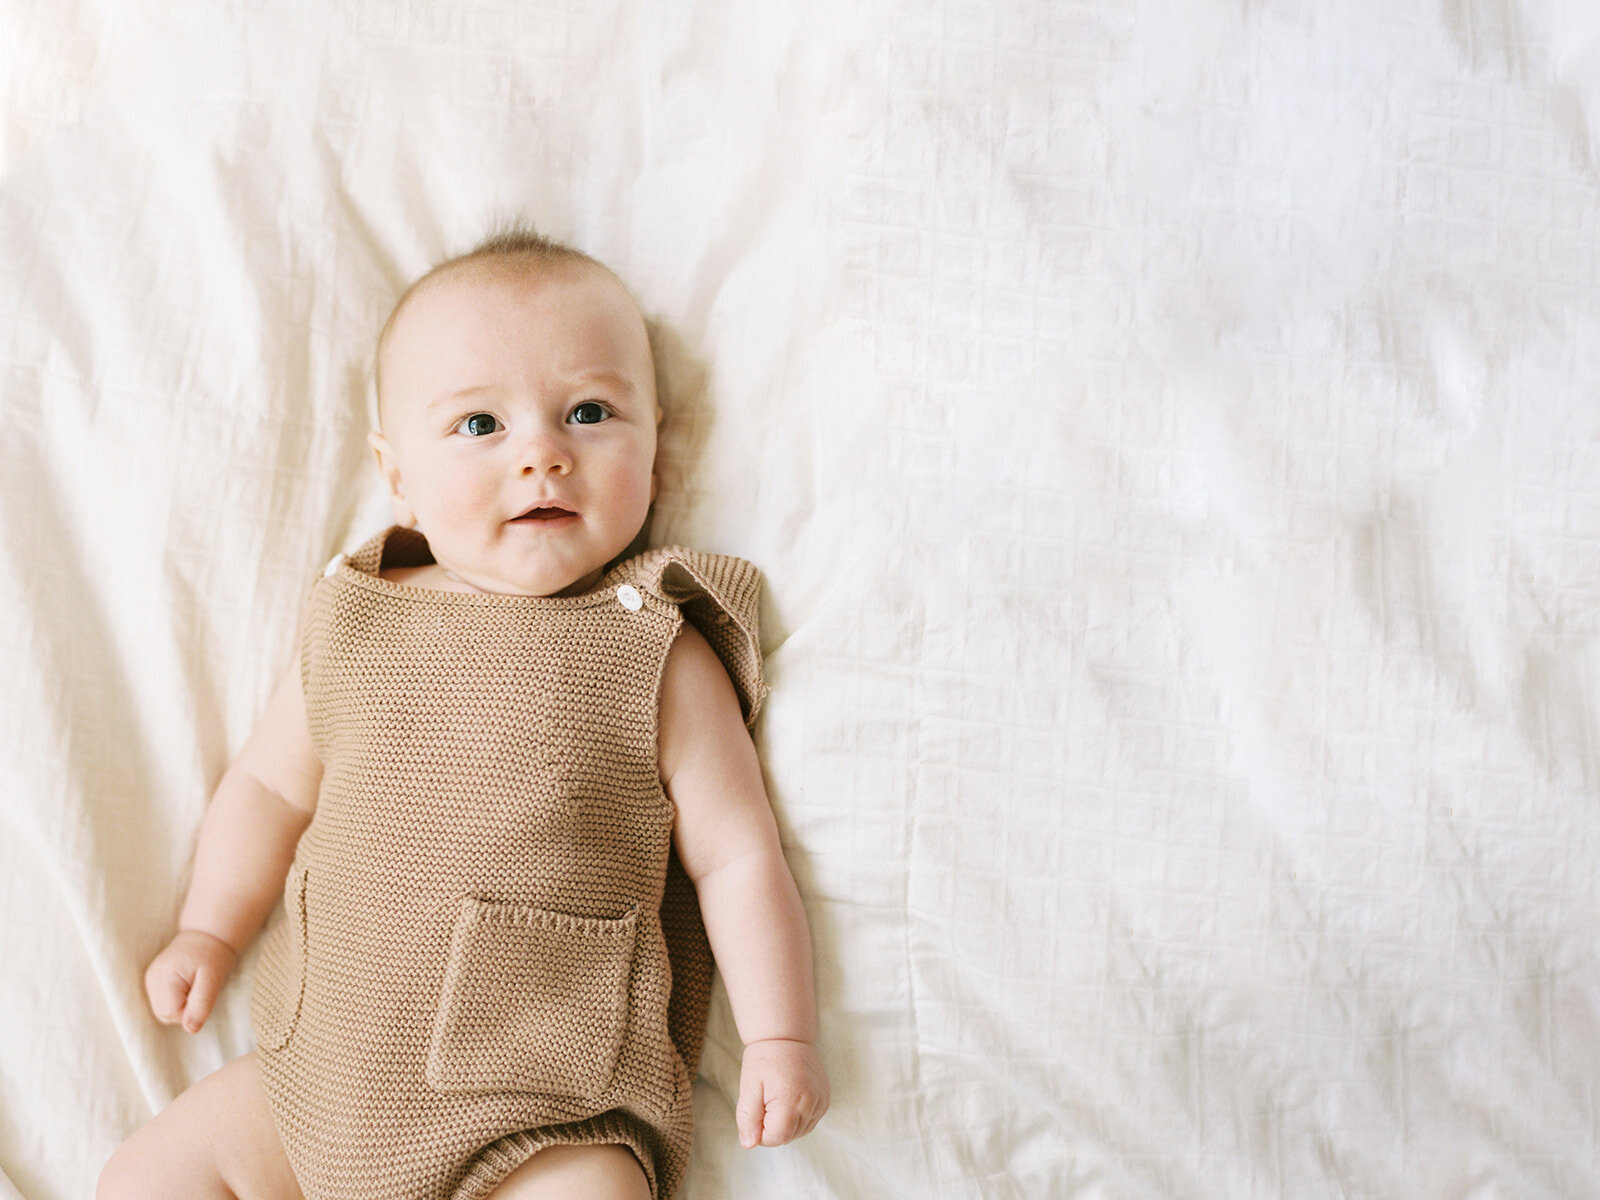 6 month old laying on a bed in knit overalls